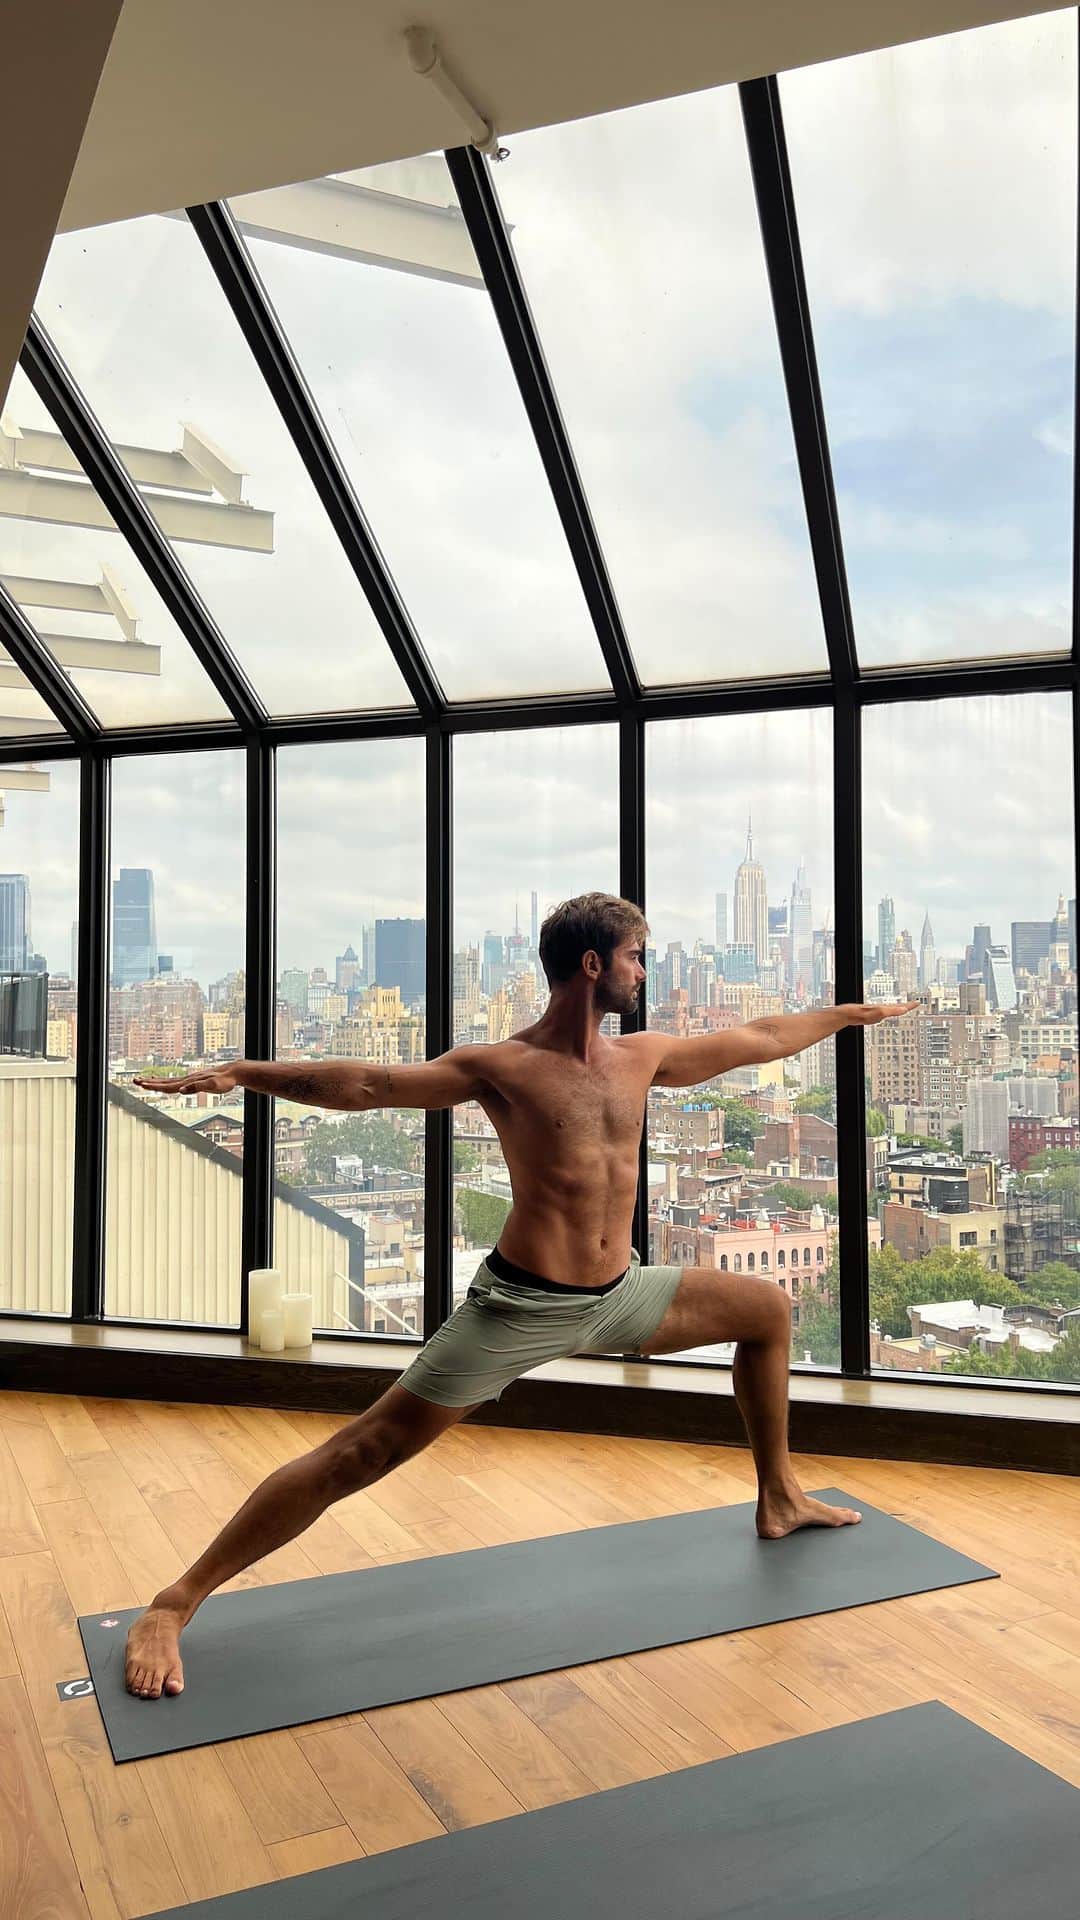 Ricardo Baldinのインスタグラム：「Growing up all my activities involved a very masculine energy, soccer, basketball, tennis and so on. Sports became not only important to maintain physical health but also for my mental health. Stress and anger release through competition have been key for me. In Yoga I found balance, connecting to subtle energies, working on pauses and conscious breath, developing sensitive and tranquil parts within me. Today my schedule involves working out, beach tennis and yoga, for me a perfect balance in between activities.   For online yoga classes hit me up for details.  Namaste 🙏🏽  . Vídeo @fcoescv 🎥」